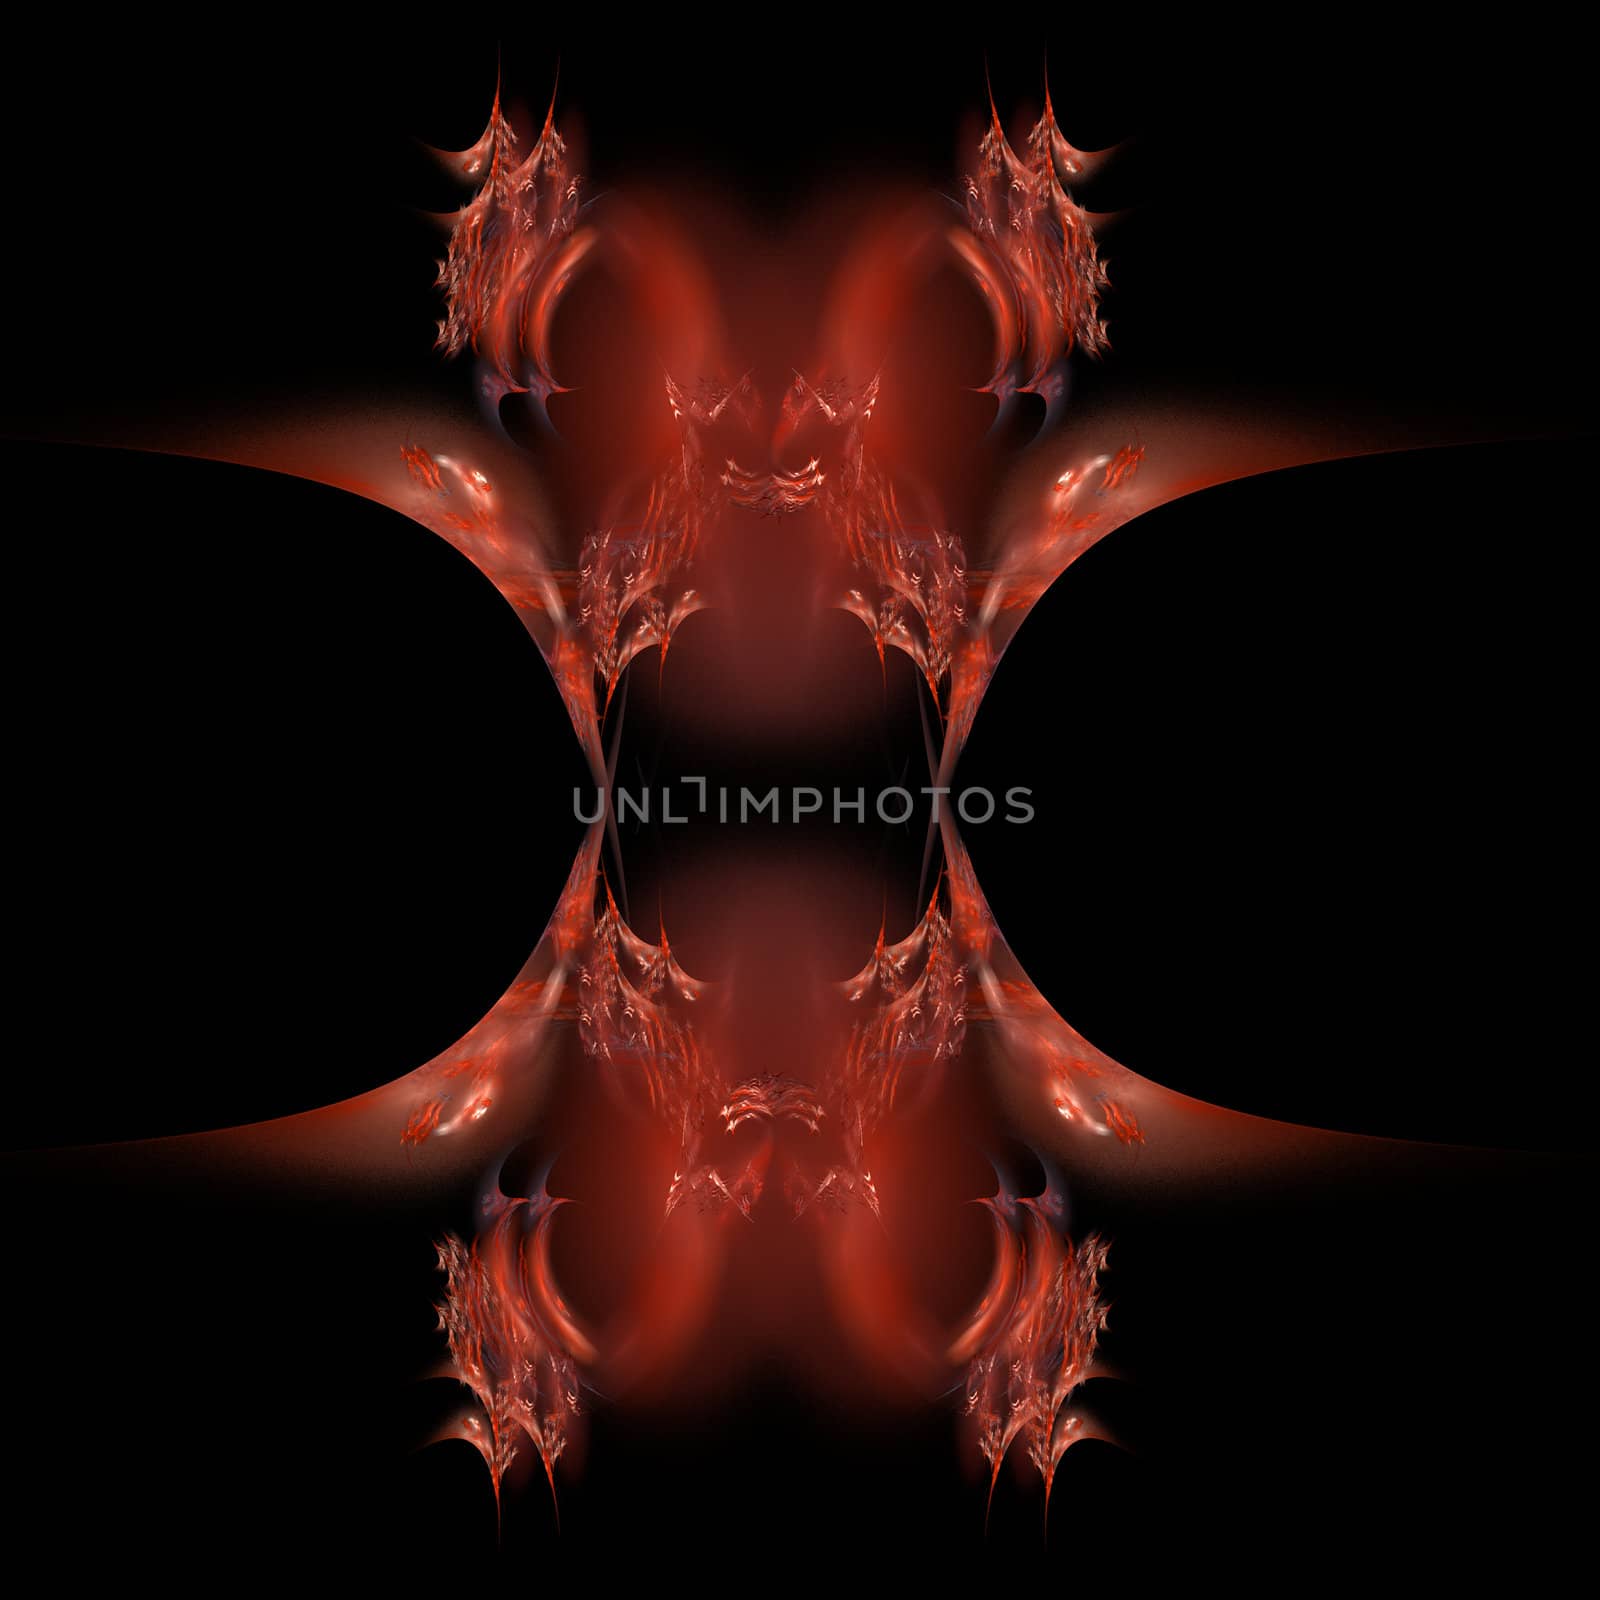 Symmetrical abstract fractal background by mhprice